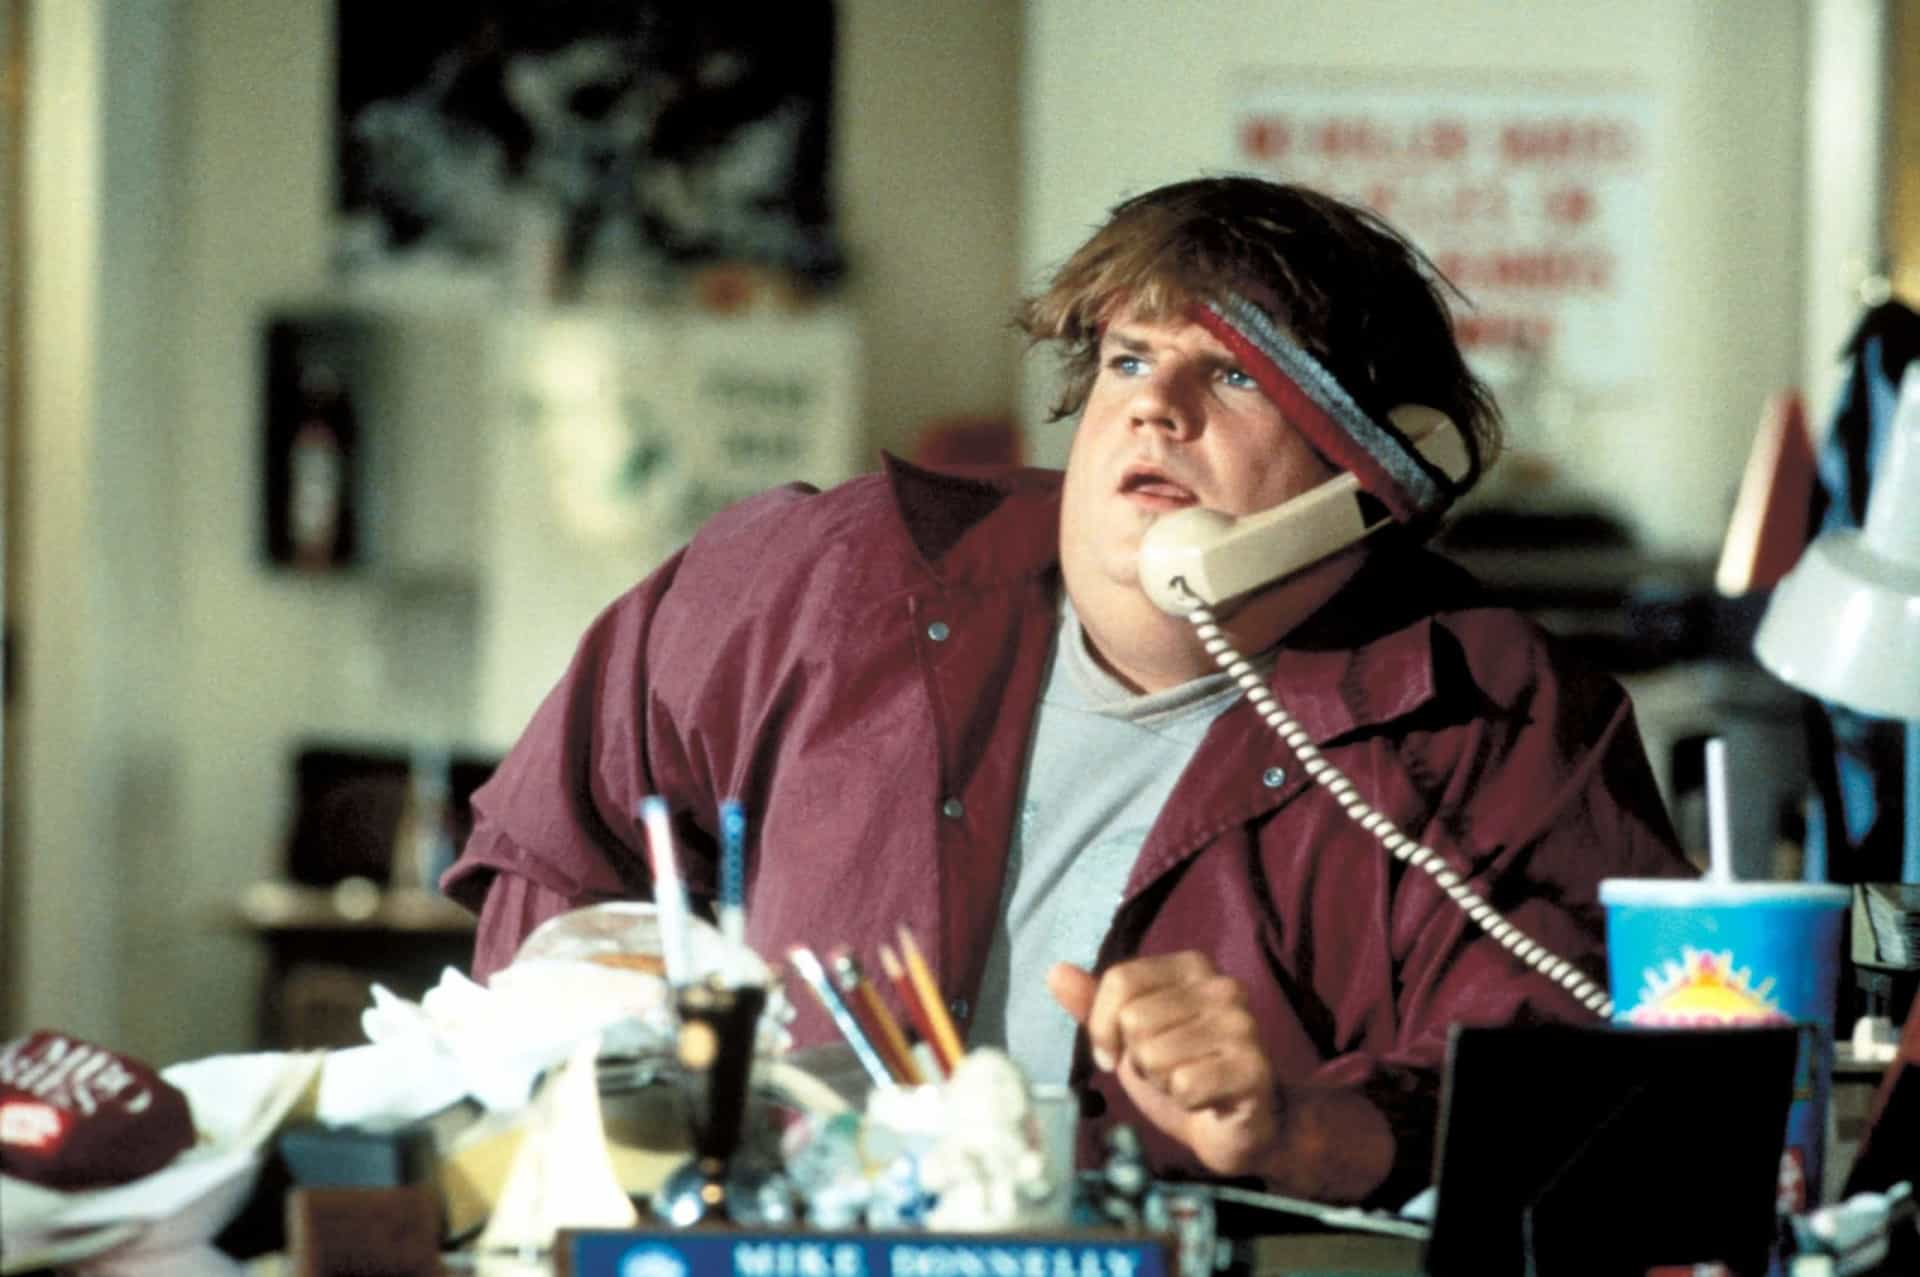 <p>'Black Sheep' (1996) is a comedy starring Chris Farley as an incompetent assistant to his brother, who is running for governor.</p><p><a href="https://www.msn.com/en-us/community/channel/vid-7xx8mnucu55yw63we9va2gwr7uihbxwc68fxqp25x6tg4ftibpra?cvid=94631541bc0f4f89bfd59158d696ad7e">Follow us and access great exclusive content everyday</a></p>